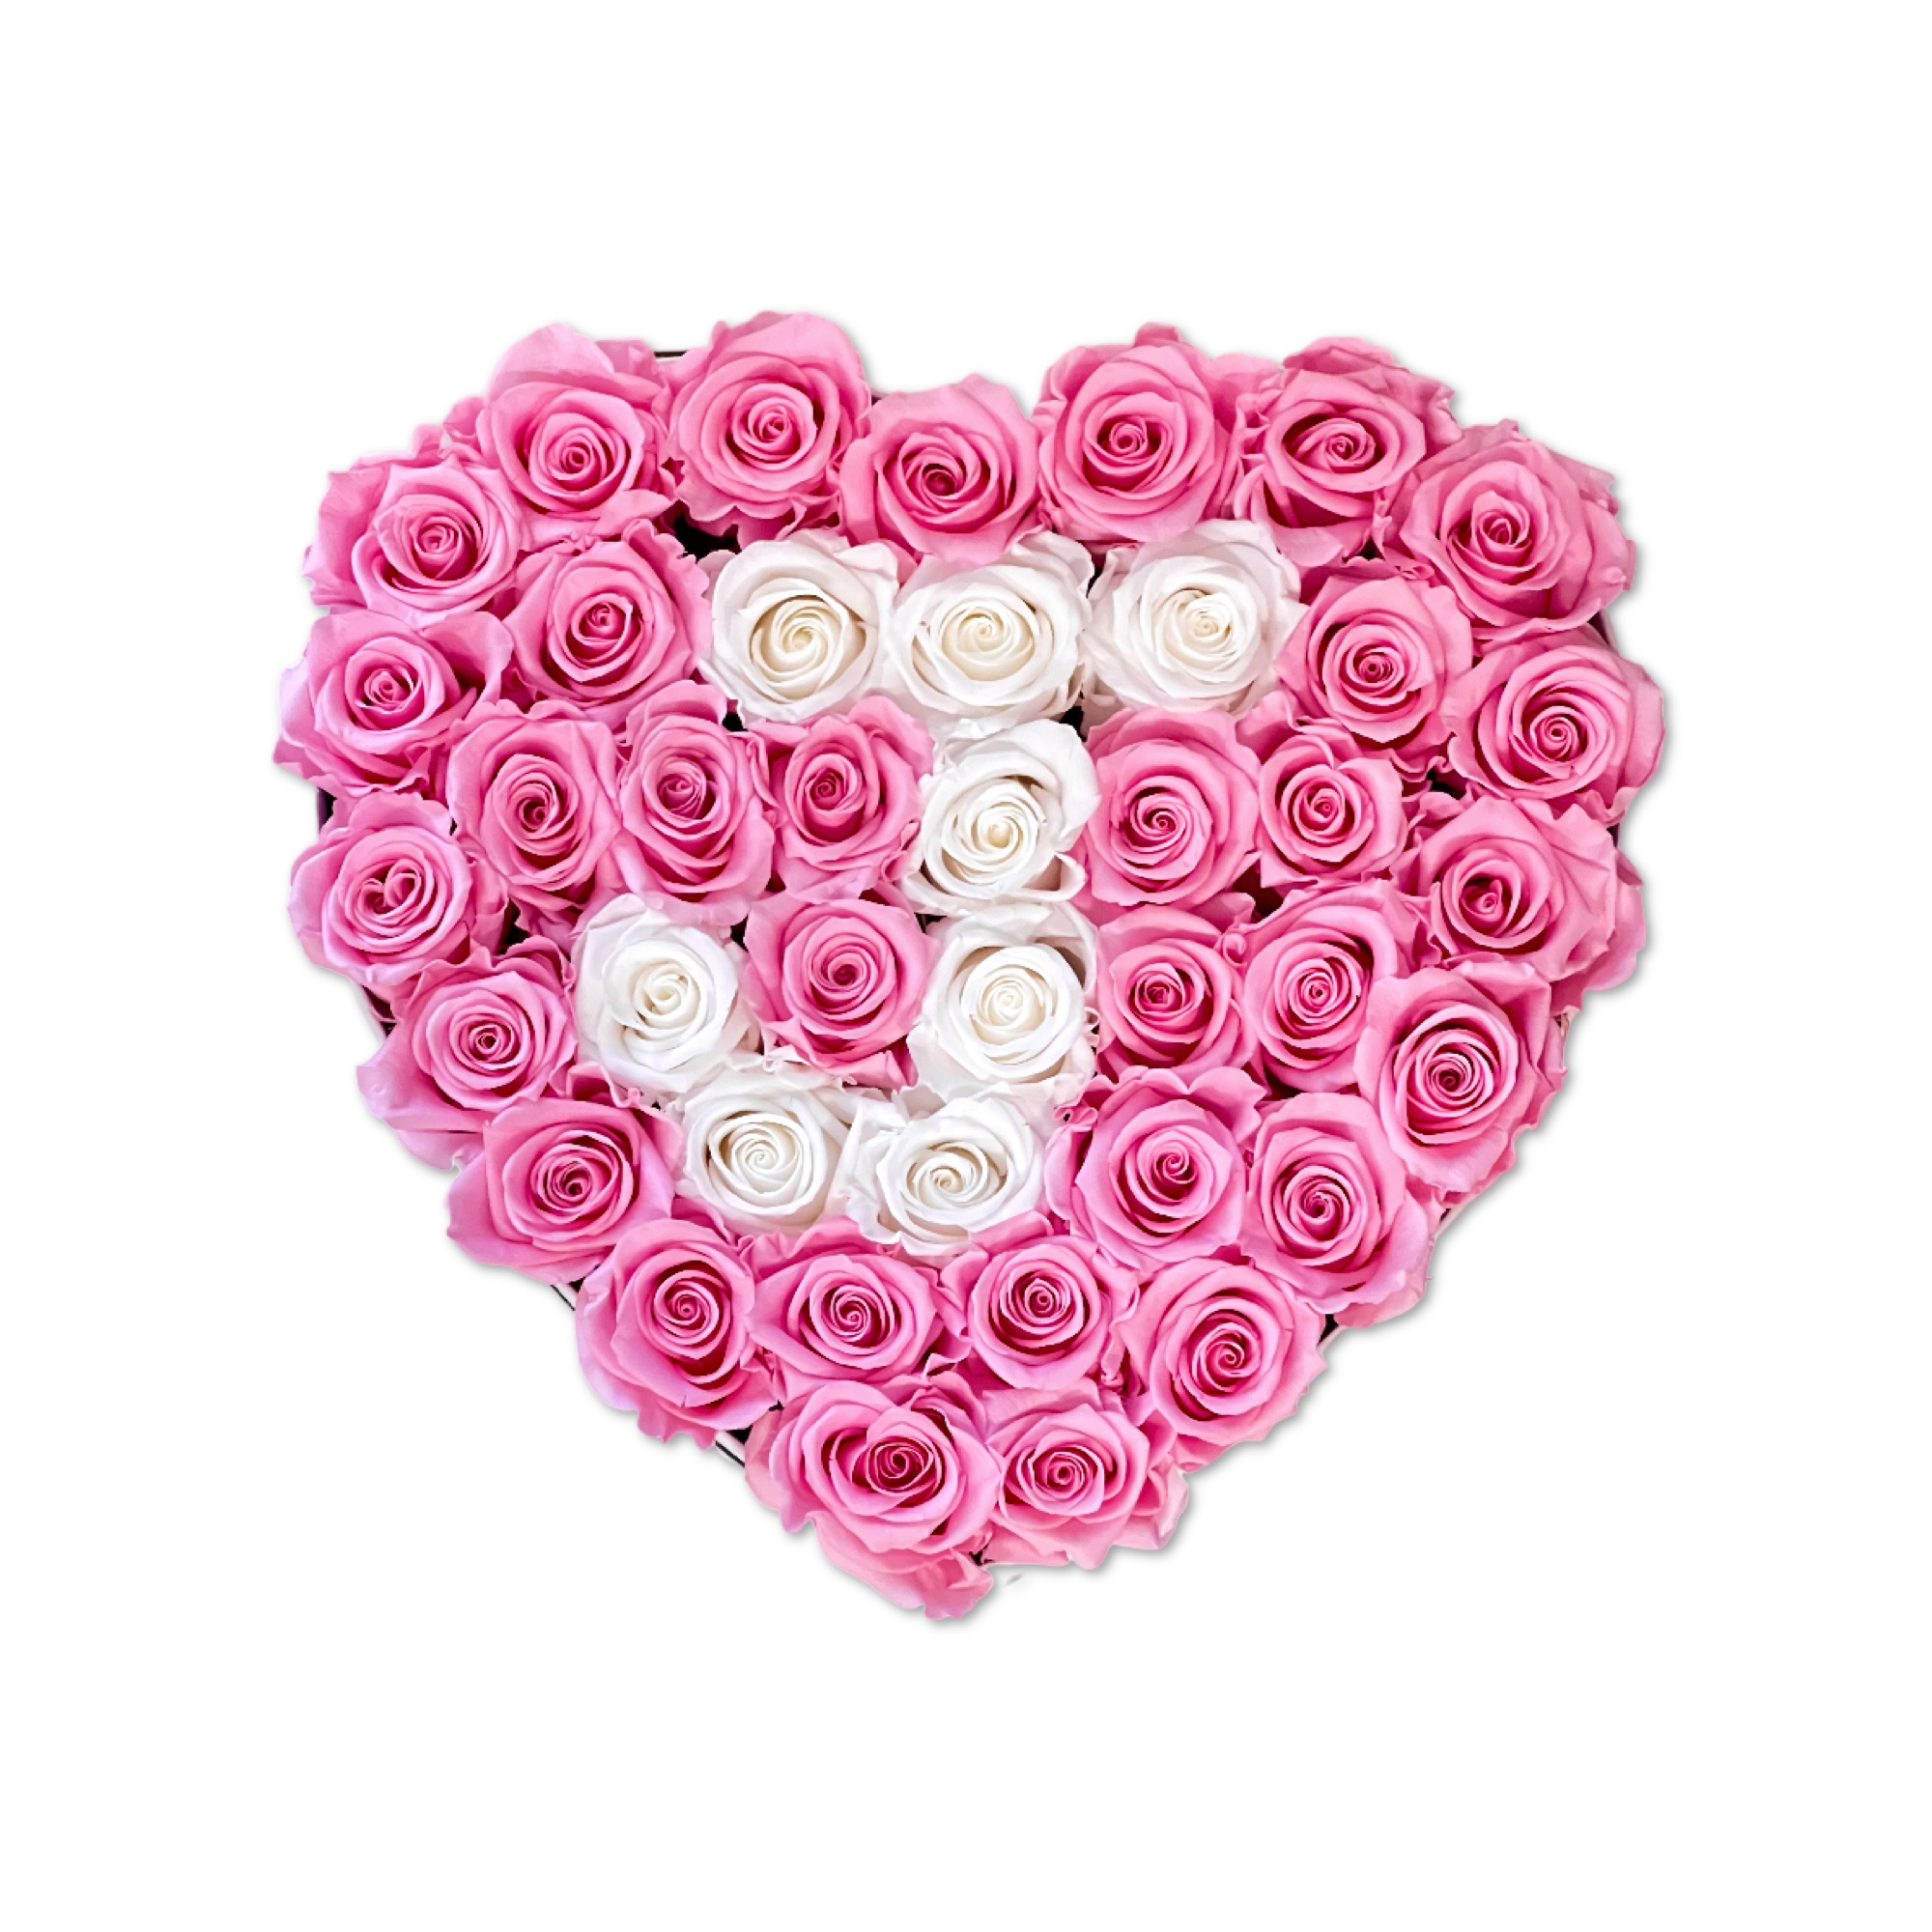 Letter J 36 White & Soft Pink Preserved Roses in A Heart Shaped Box - Small Heart Luxury White Suede Box